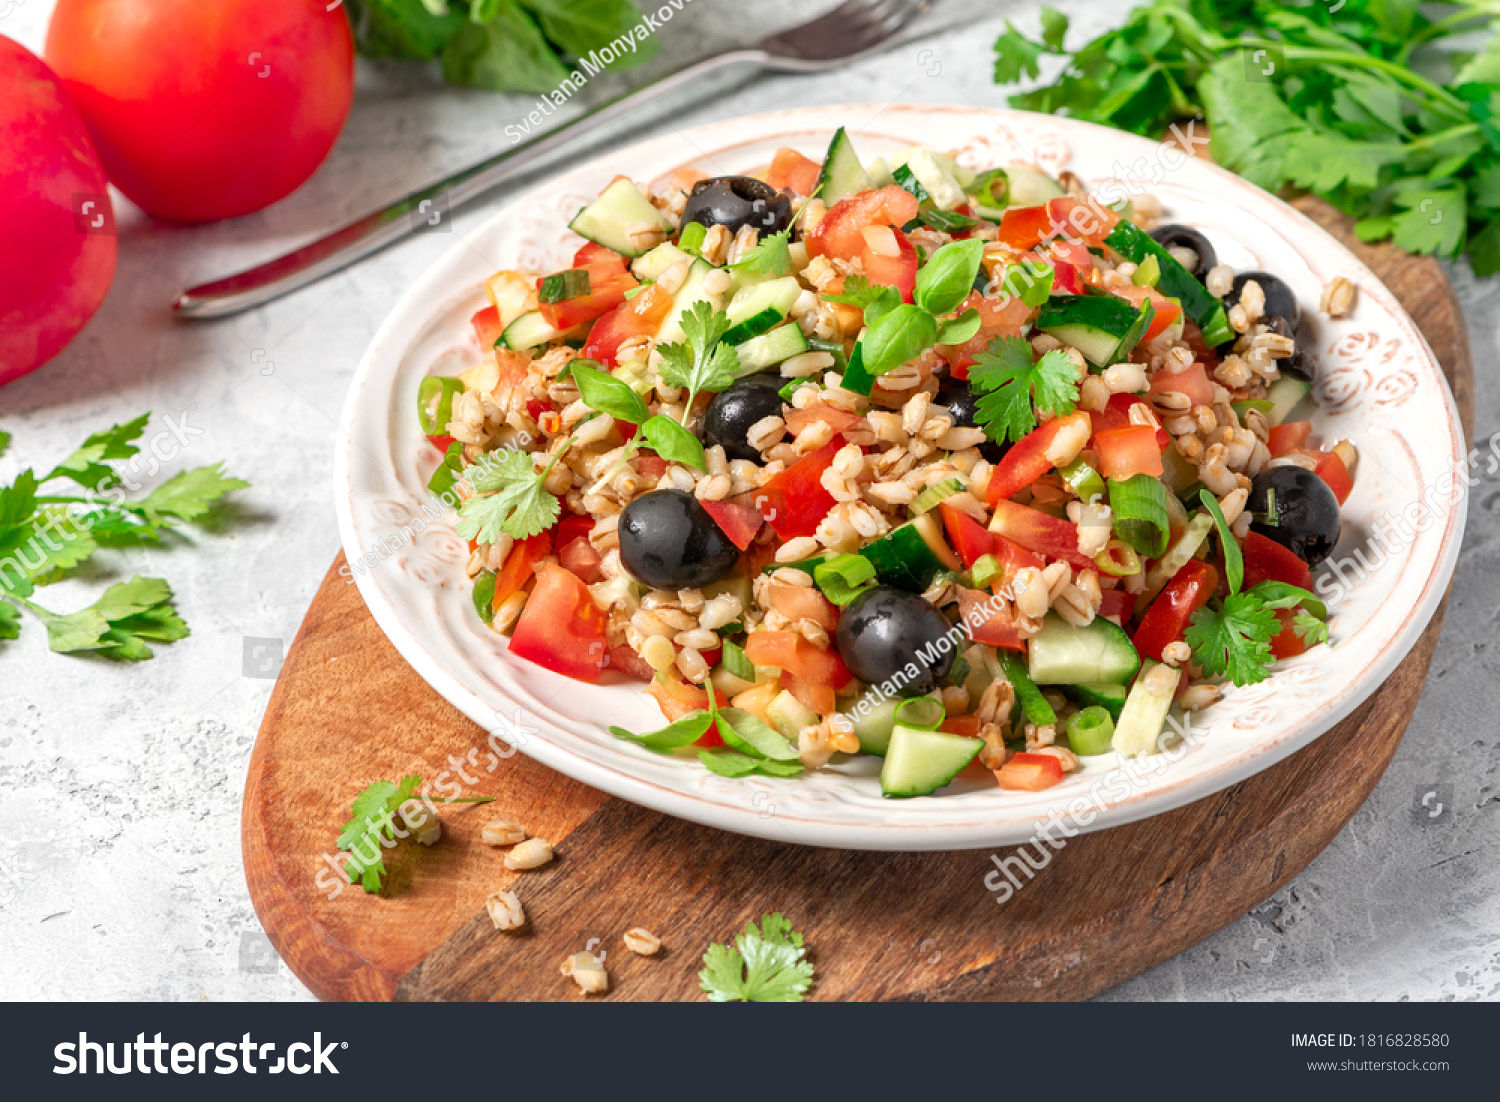 Pearl barley salad with vegetables in a plate close-up. Boiled pearl barley with tomatoes, cucumbers, olives, parsley and basil. Vegan and vegetarian food. #1816828580